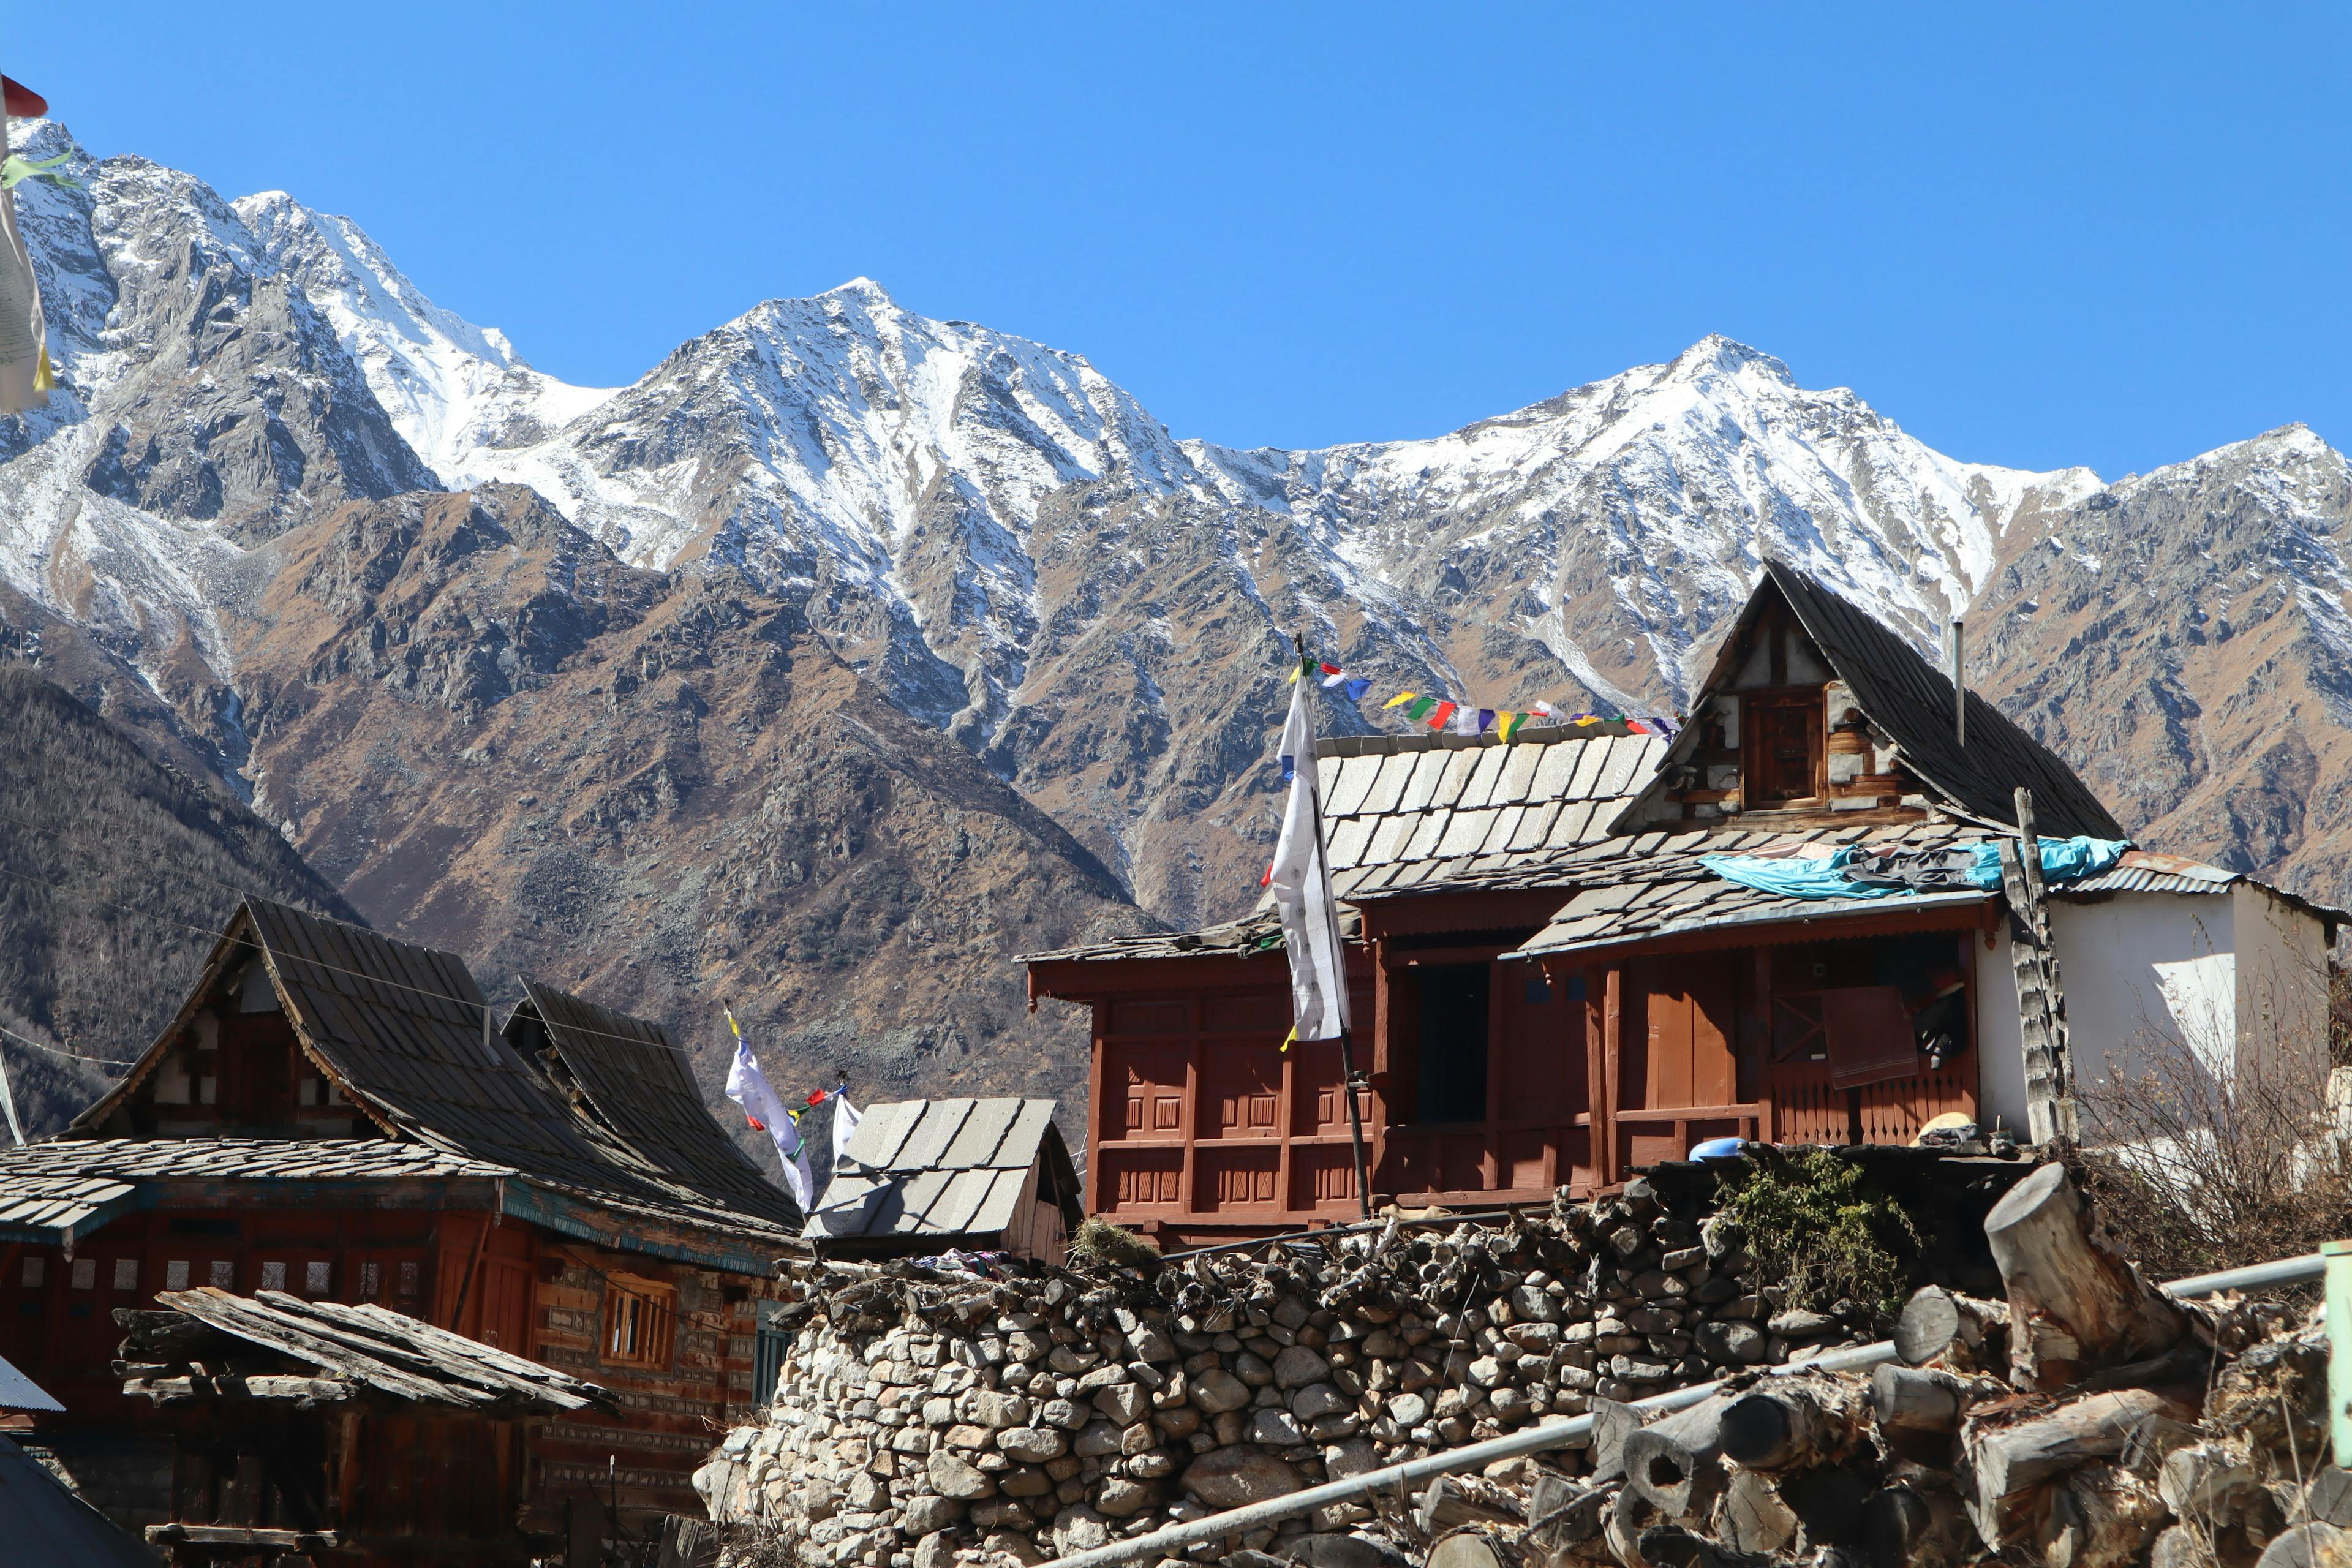 Vernacular houses with the Himalayas in the background